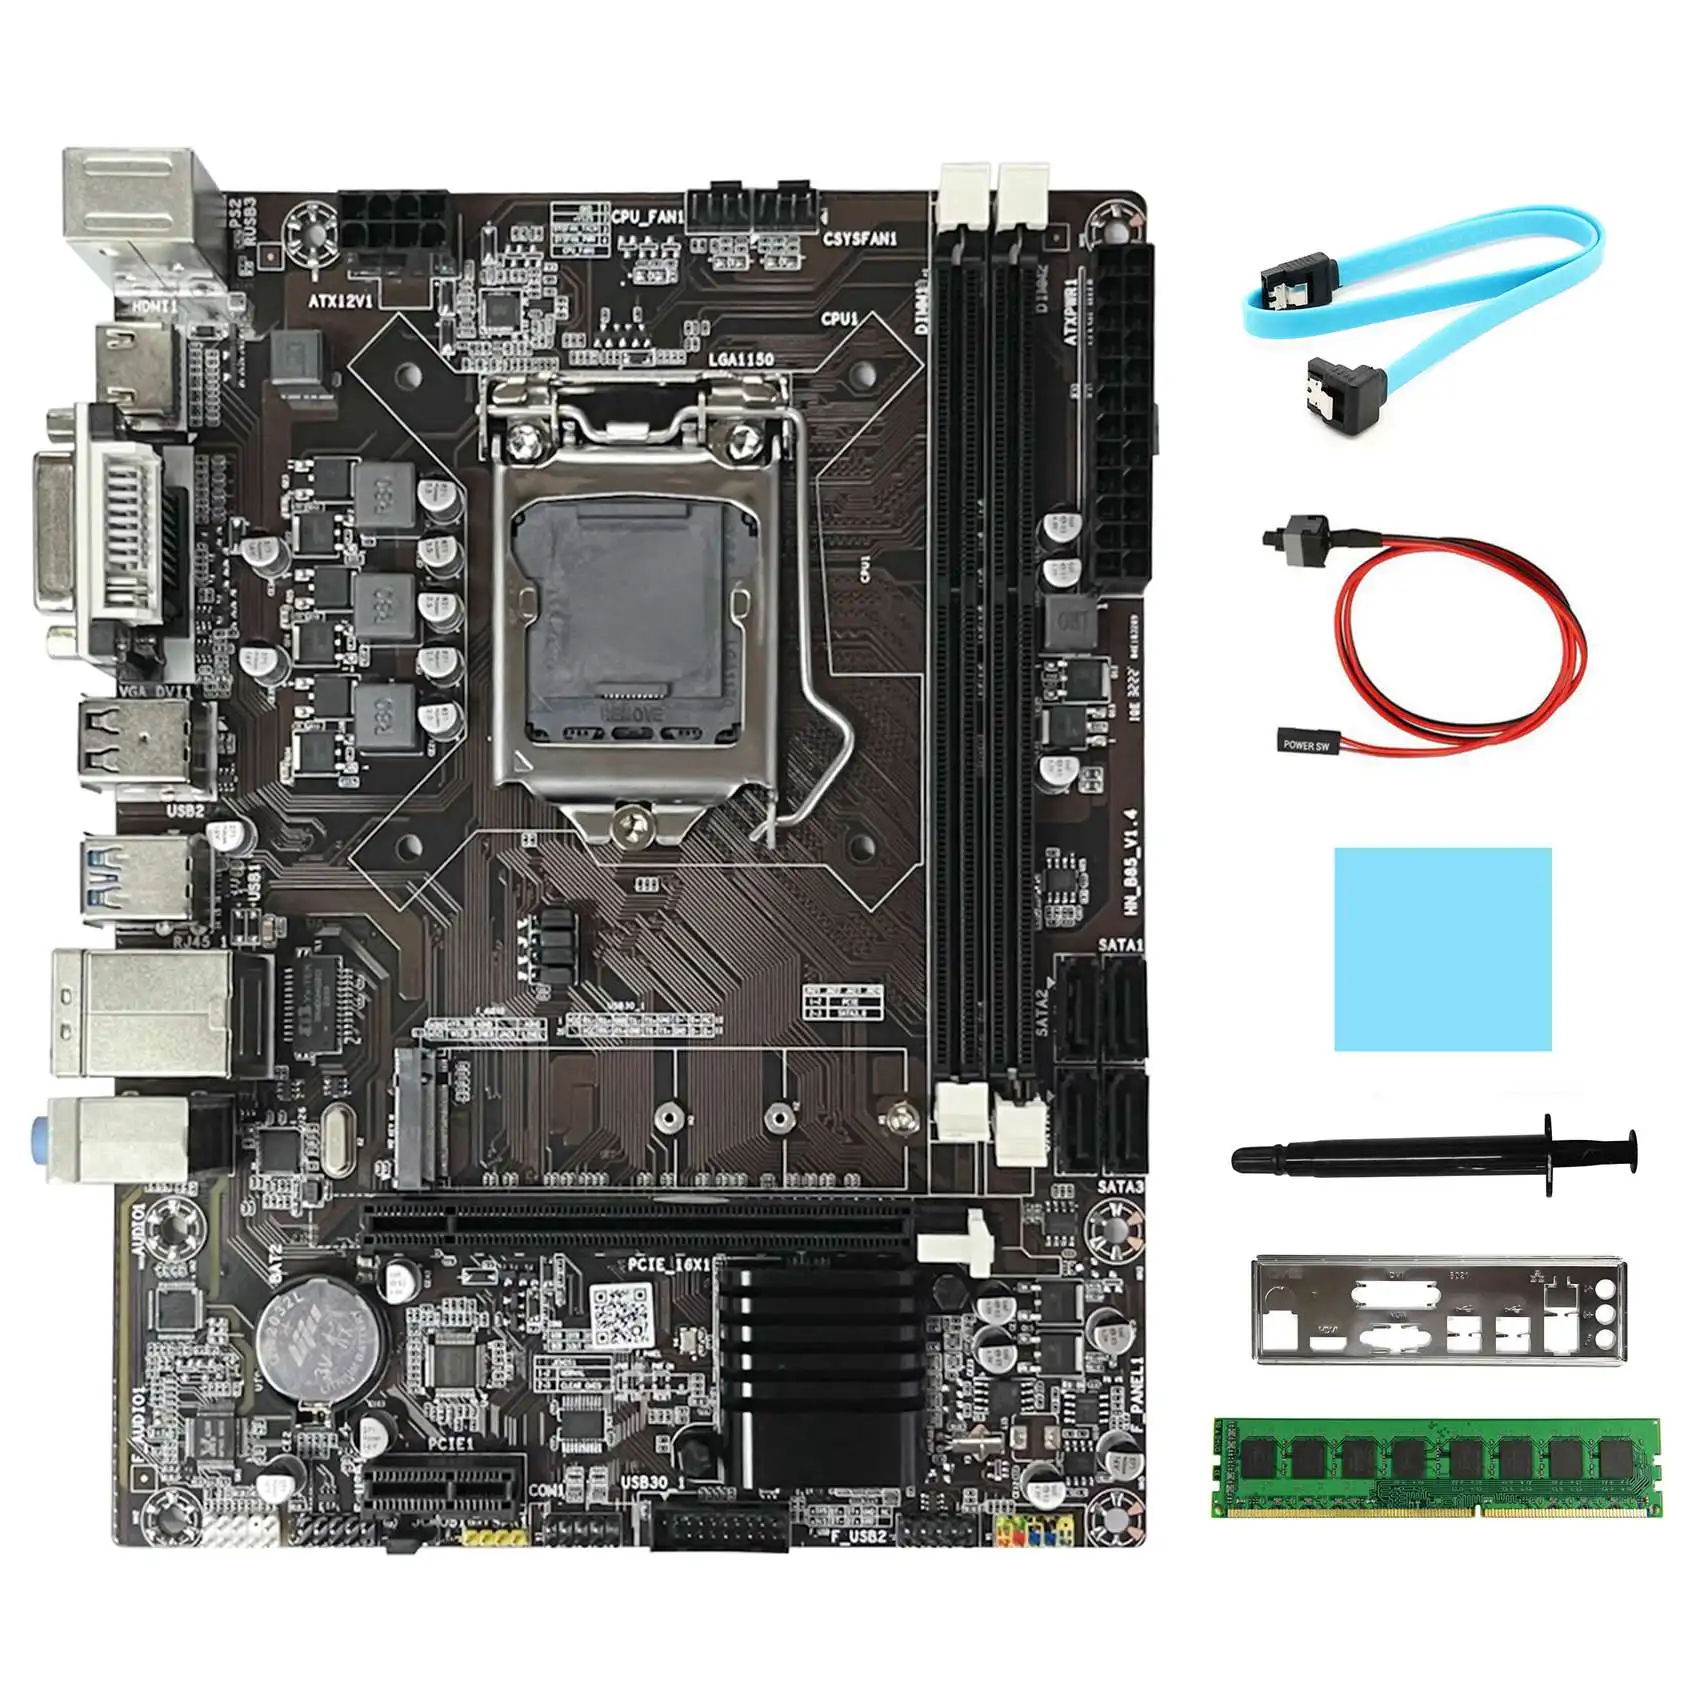 

B85 Motherboard+DDR3 4GB 1600Mhz RAM+SATA Cable+Switch Cable+Baffle+Thermal Grease LGA1150 DDR3 for 4Th I7 I5 I3 CPU